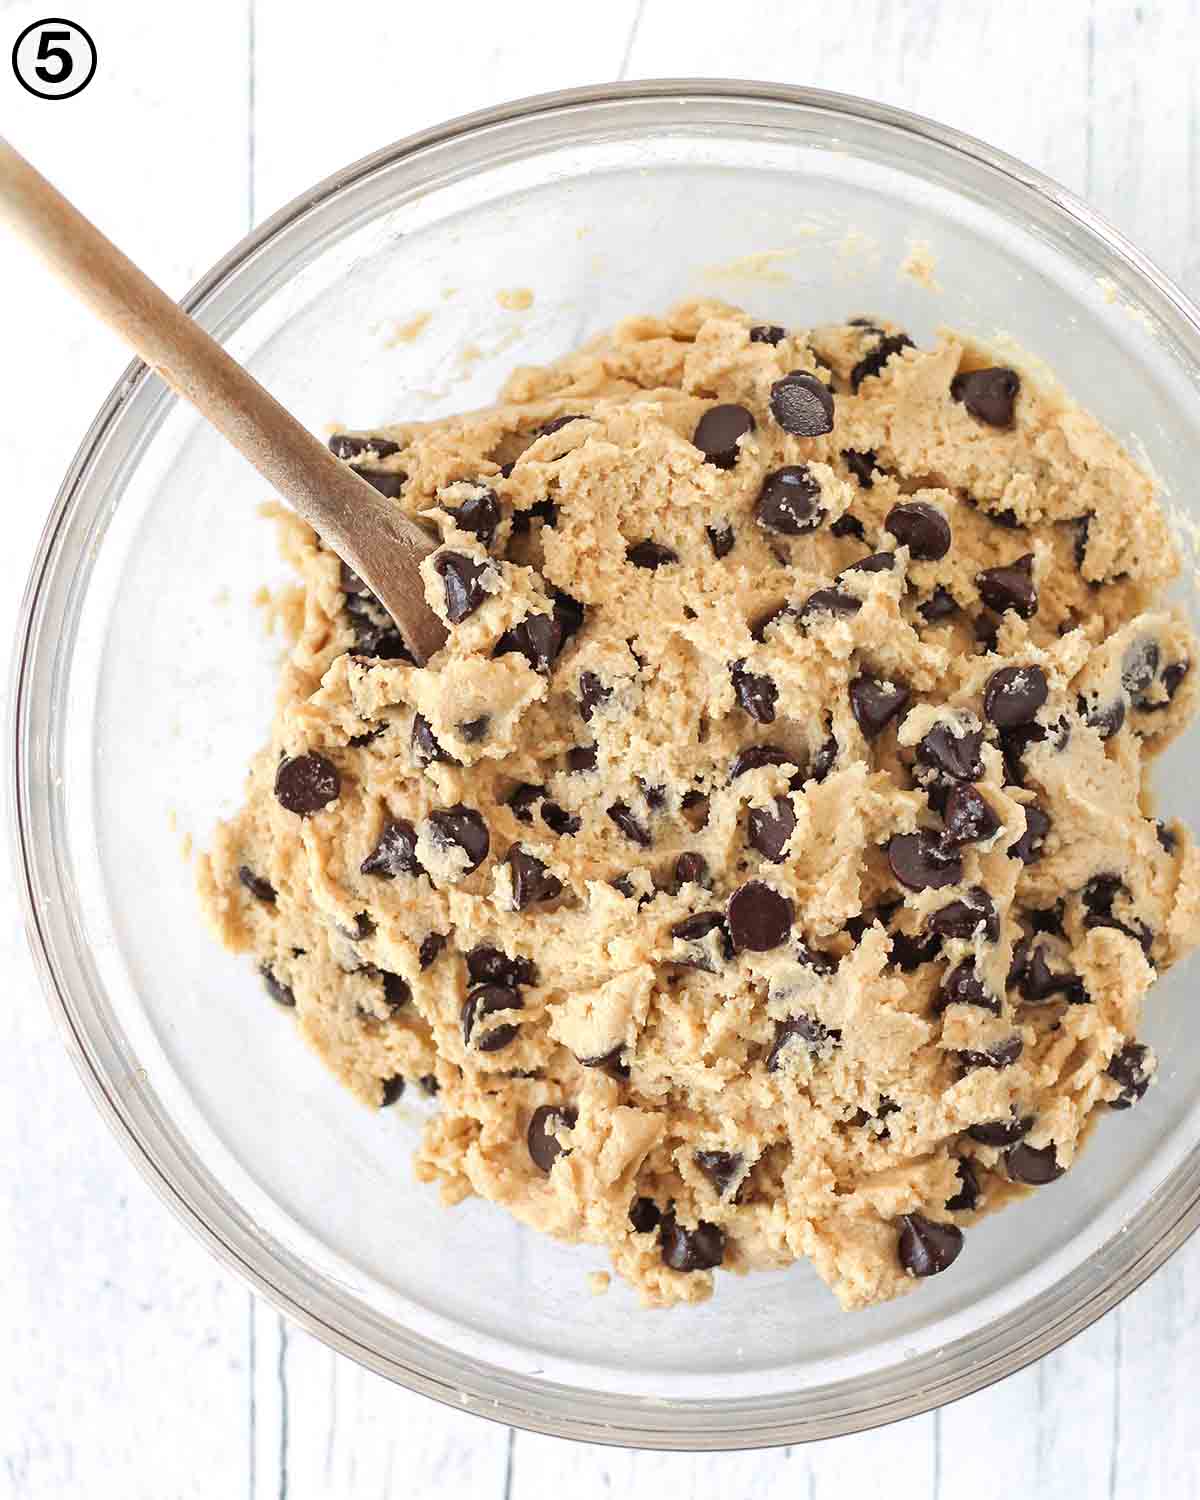 An overhead shot showing a glass bowl filled with vegan almond flour chocolate chip cookie dough.